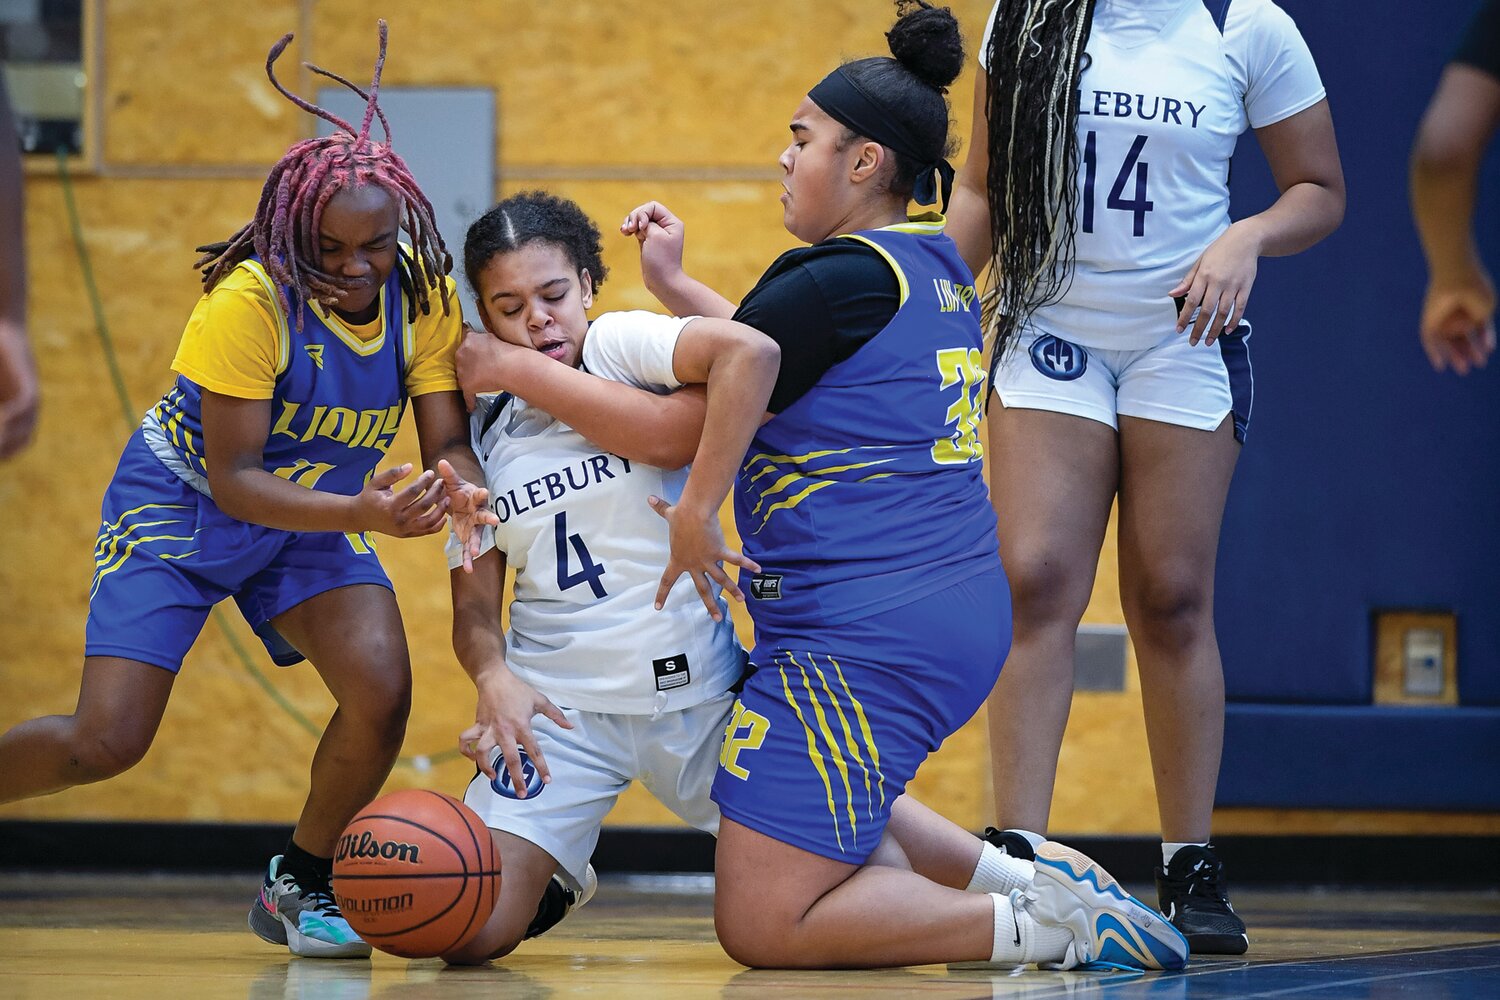 Solebury’s Tyler Joseph gets sandwiched between City’s Ny’gie Young and Kaylee Suarez while chasing a loose rebound.